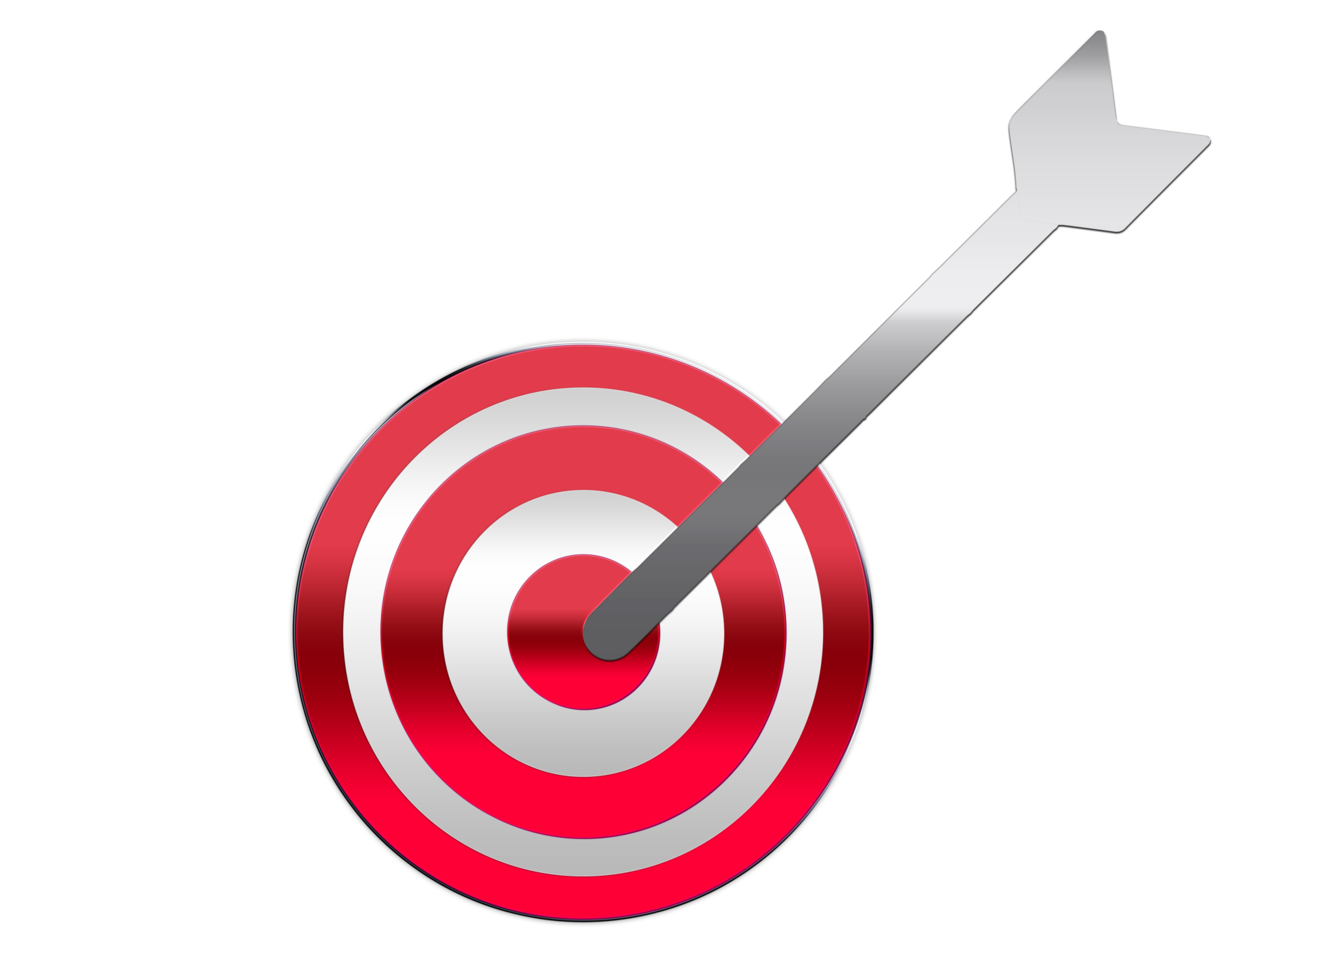 Bullseye with target symbol icon on transparent background png